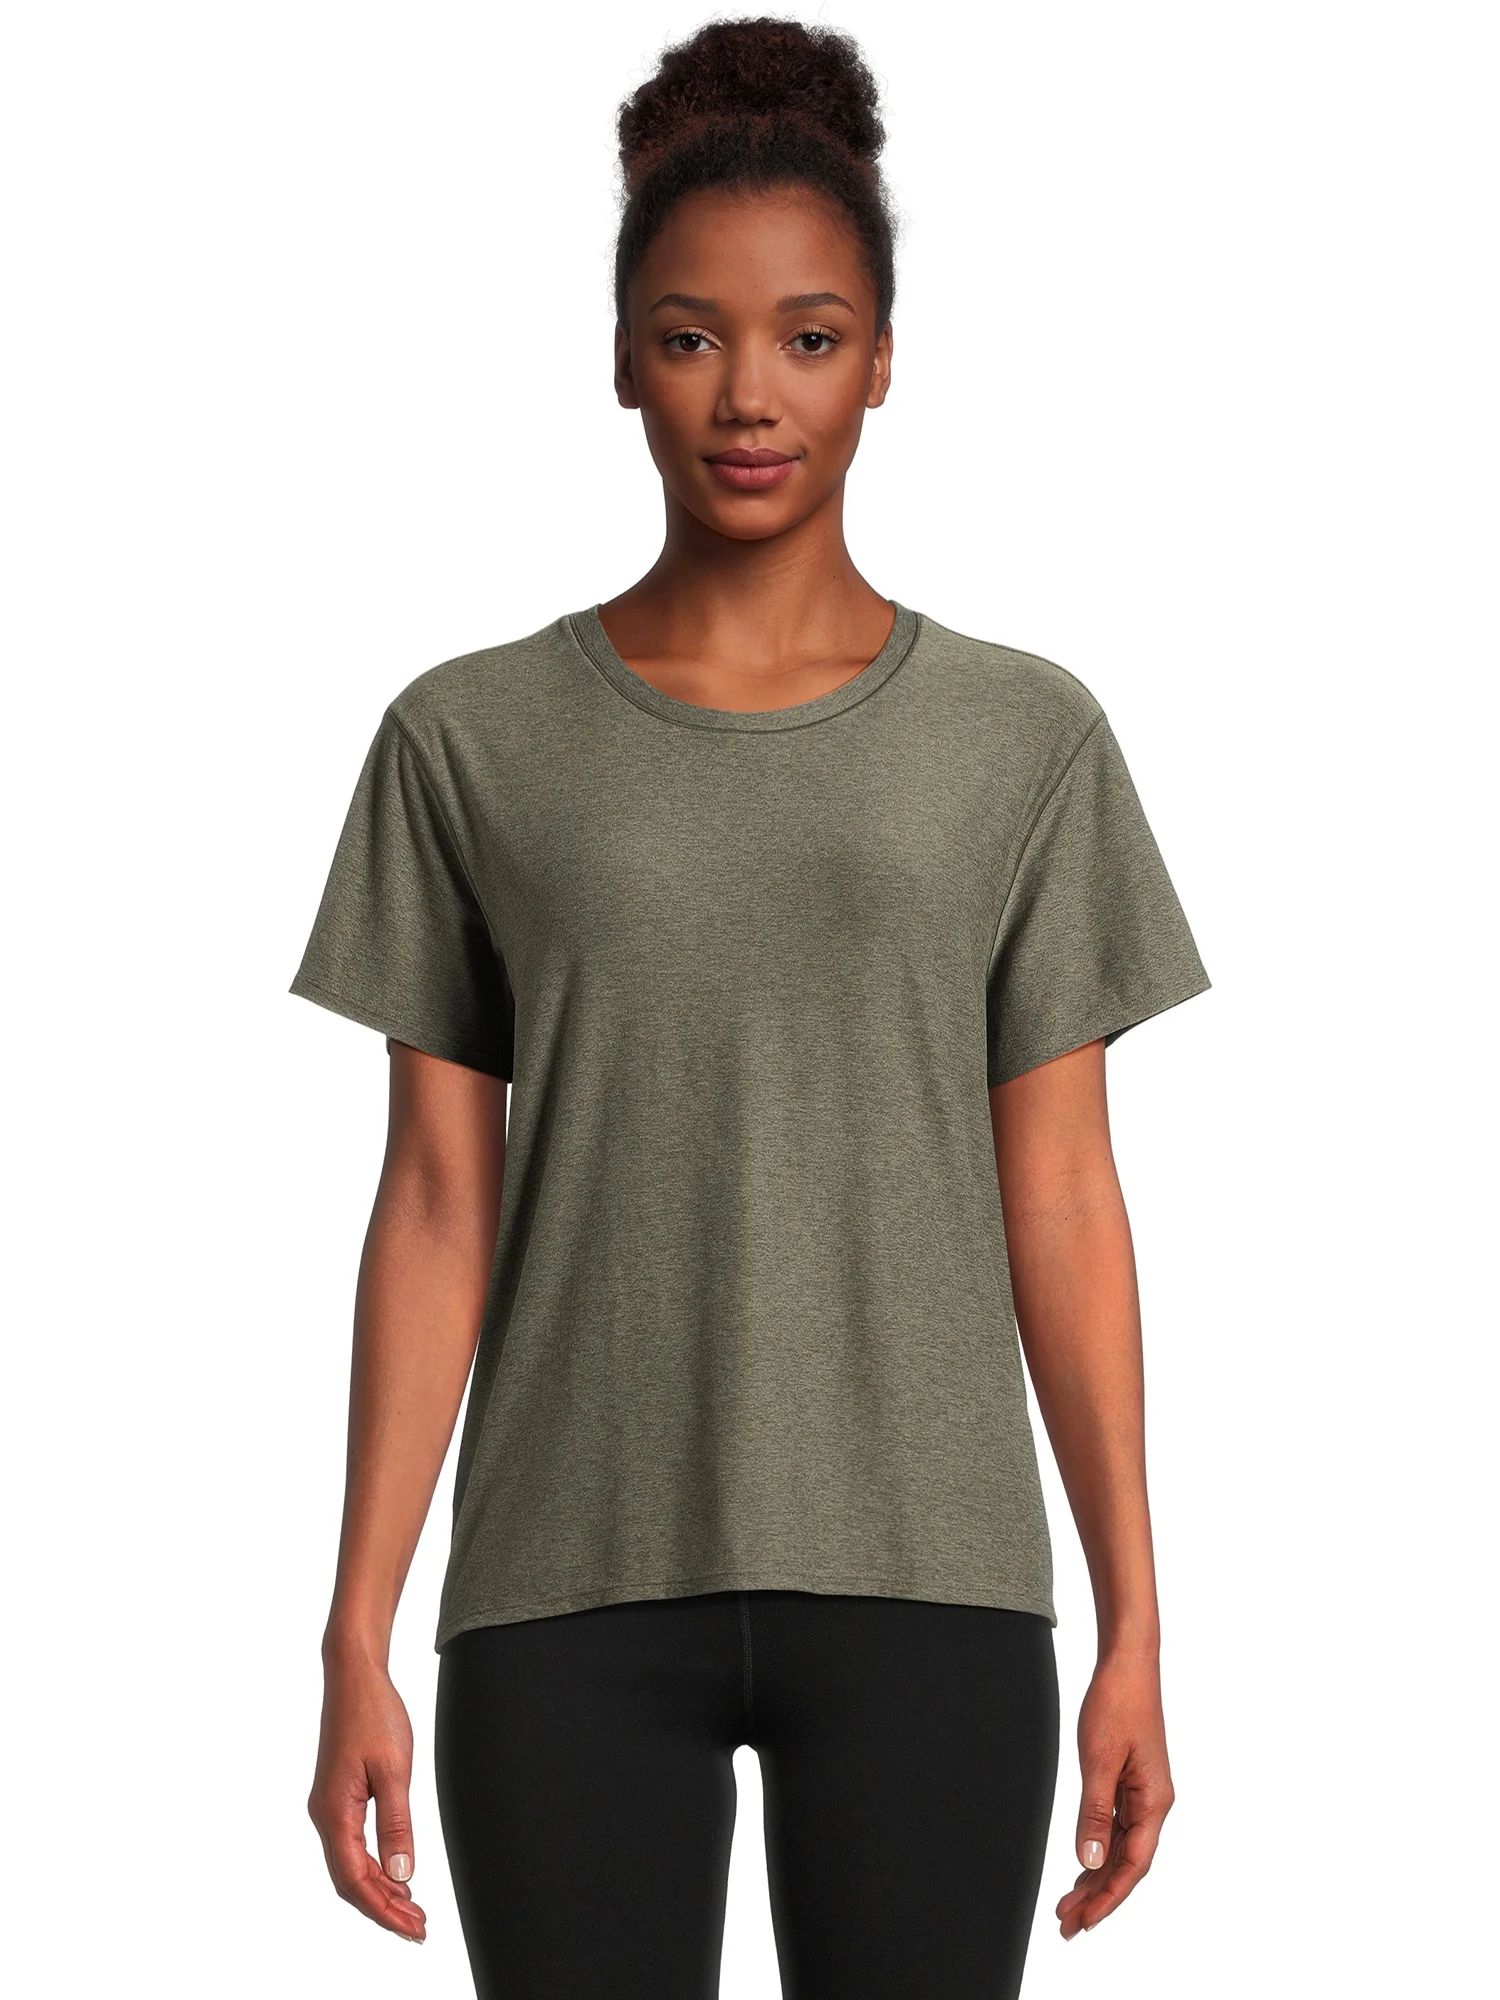 Athletic Works Women's ButterCore Tee with Short Sleeves, Sizes XS-XXXL | Walmart (US)